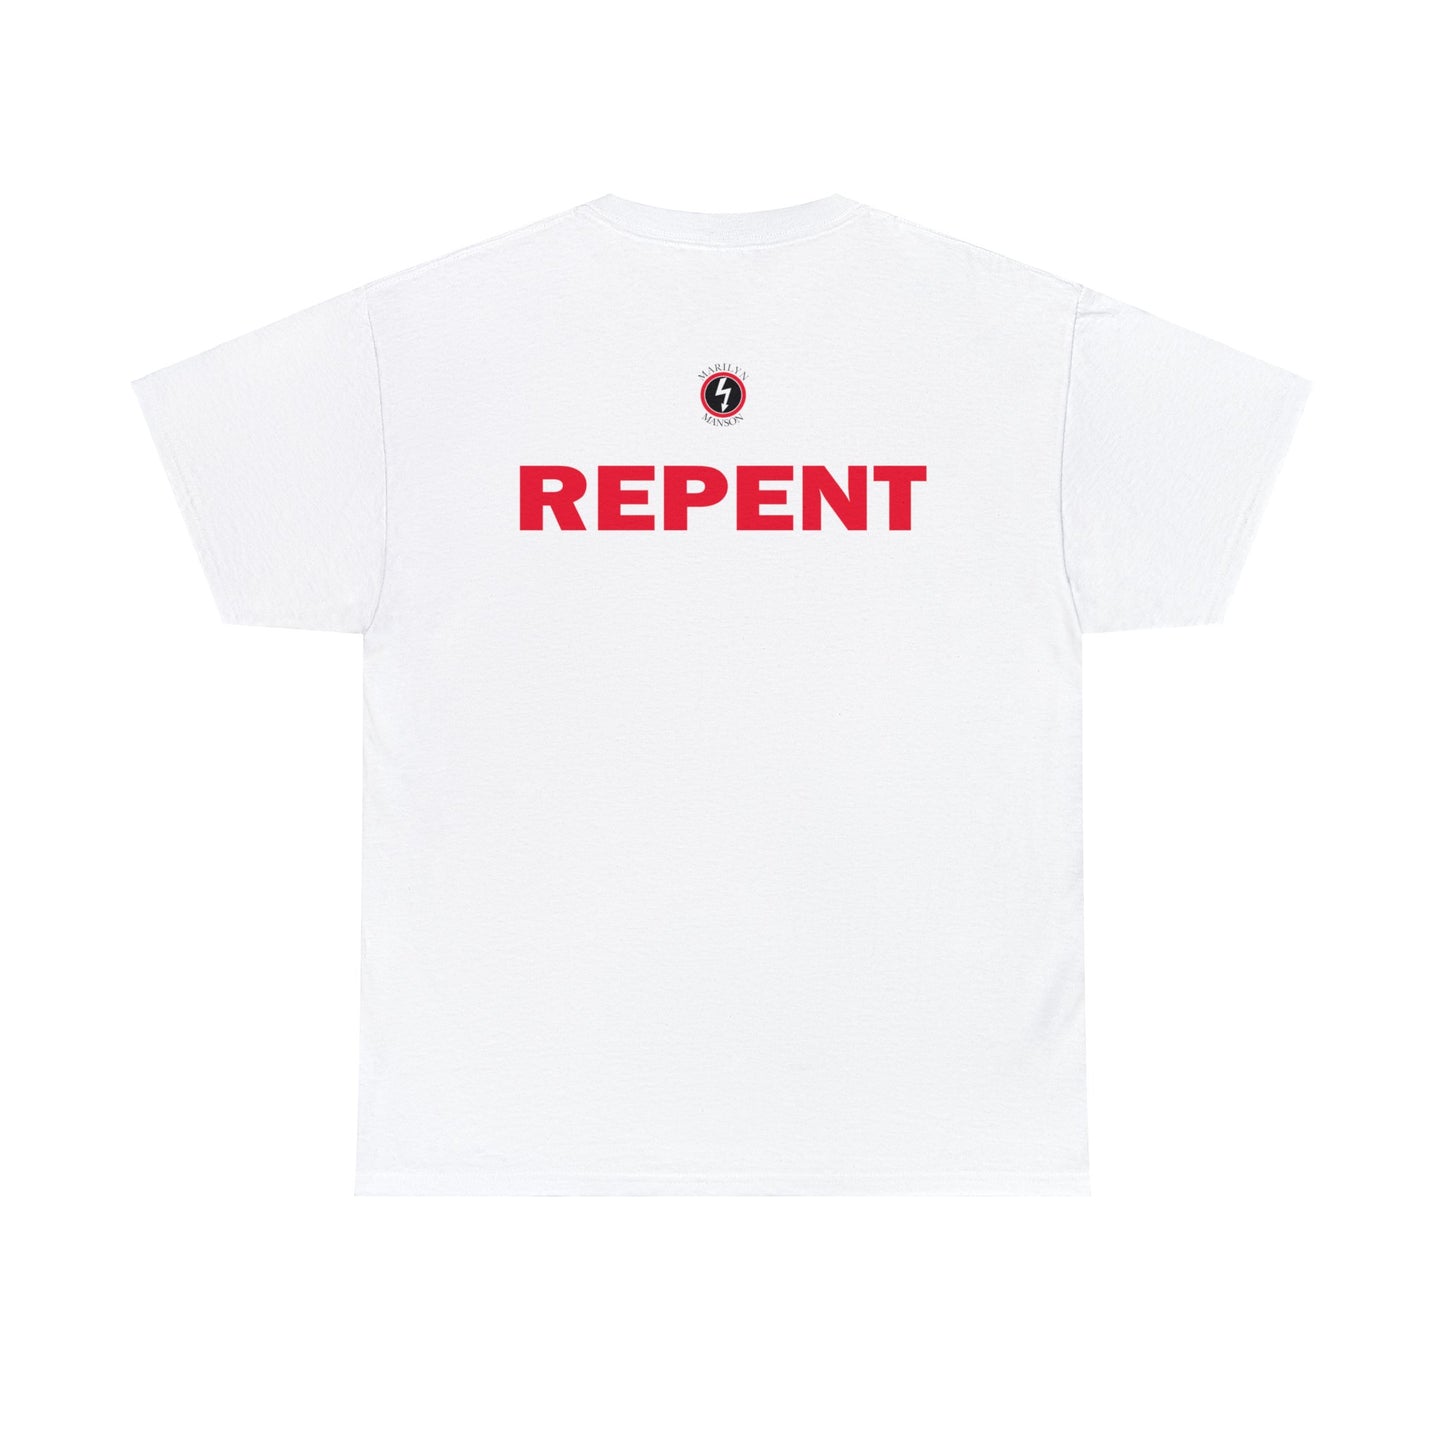 Marilyn Manson Antichrist Superstar Repent T-shirt for Sale